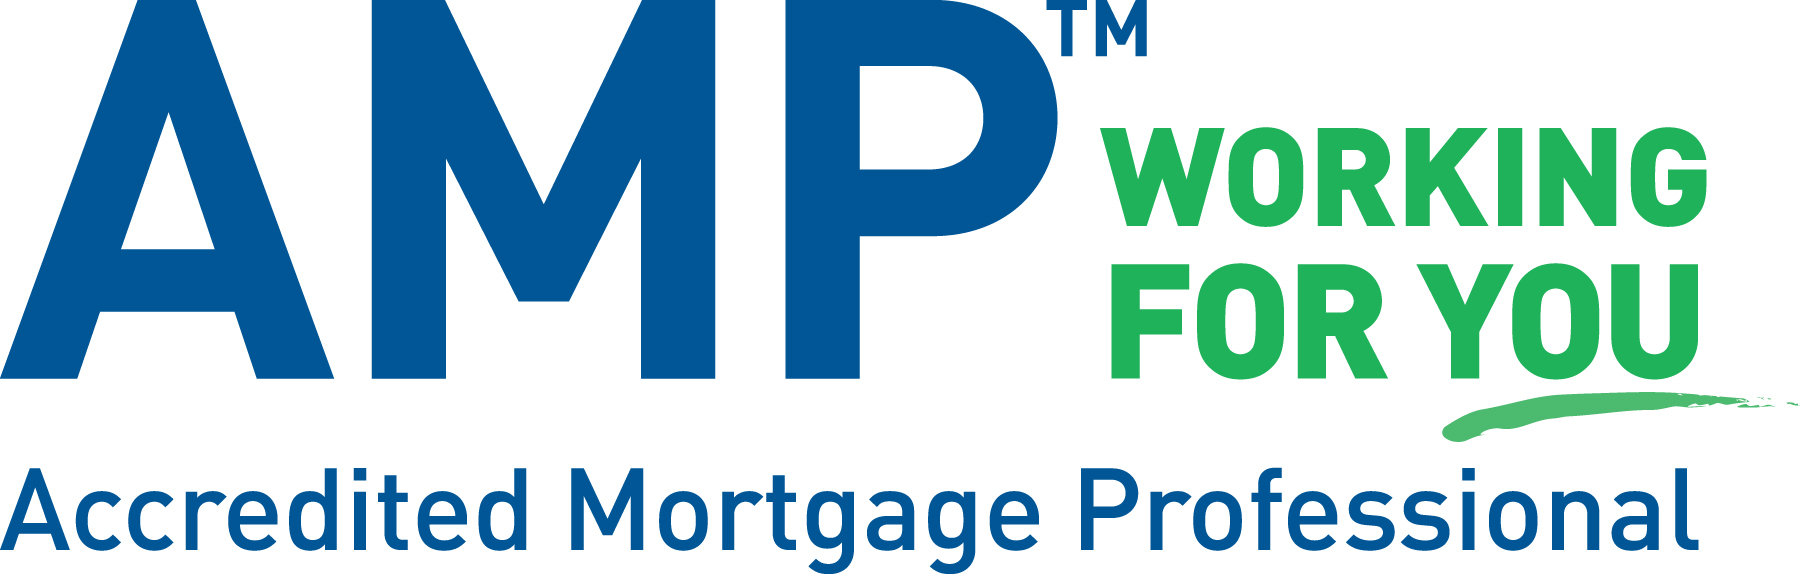 Accredited Mortgage Professional